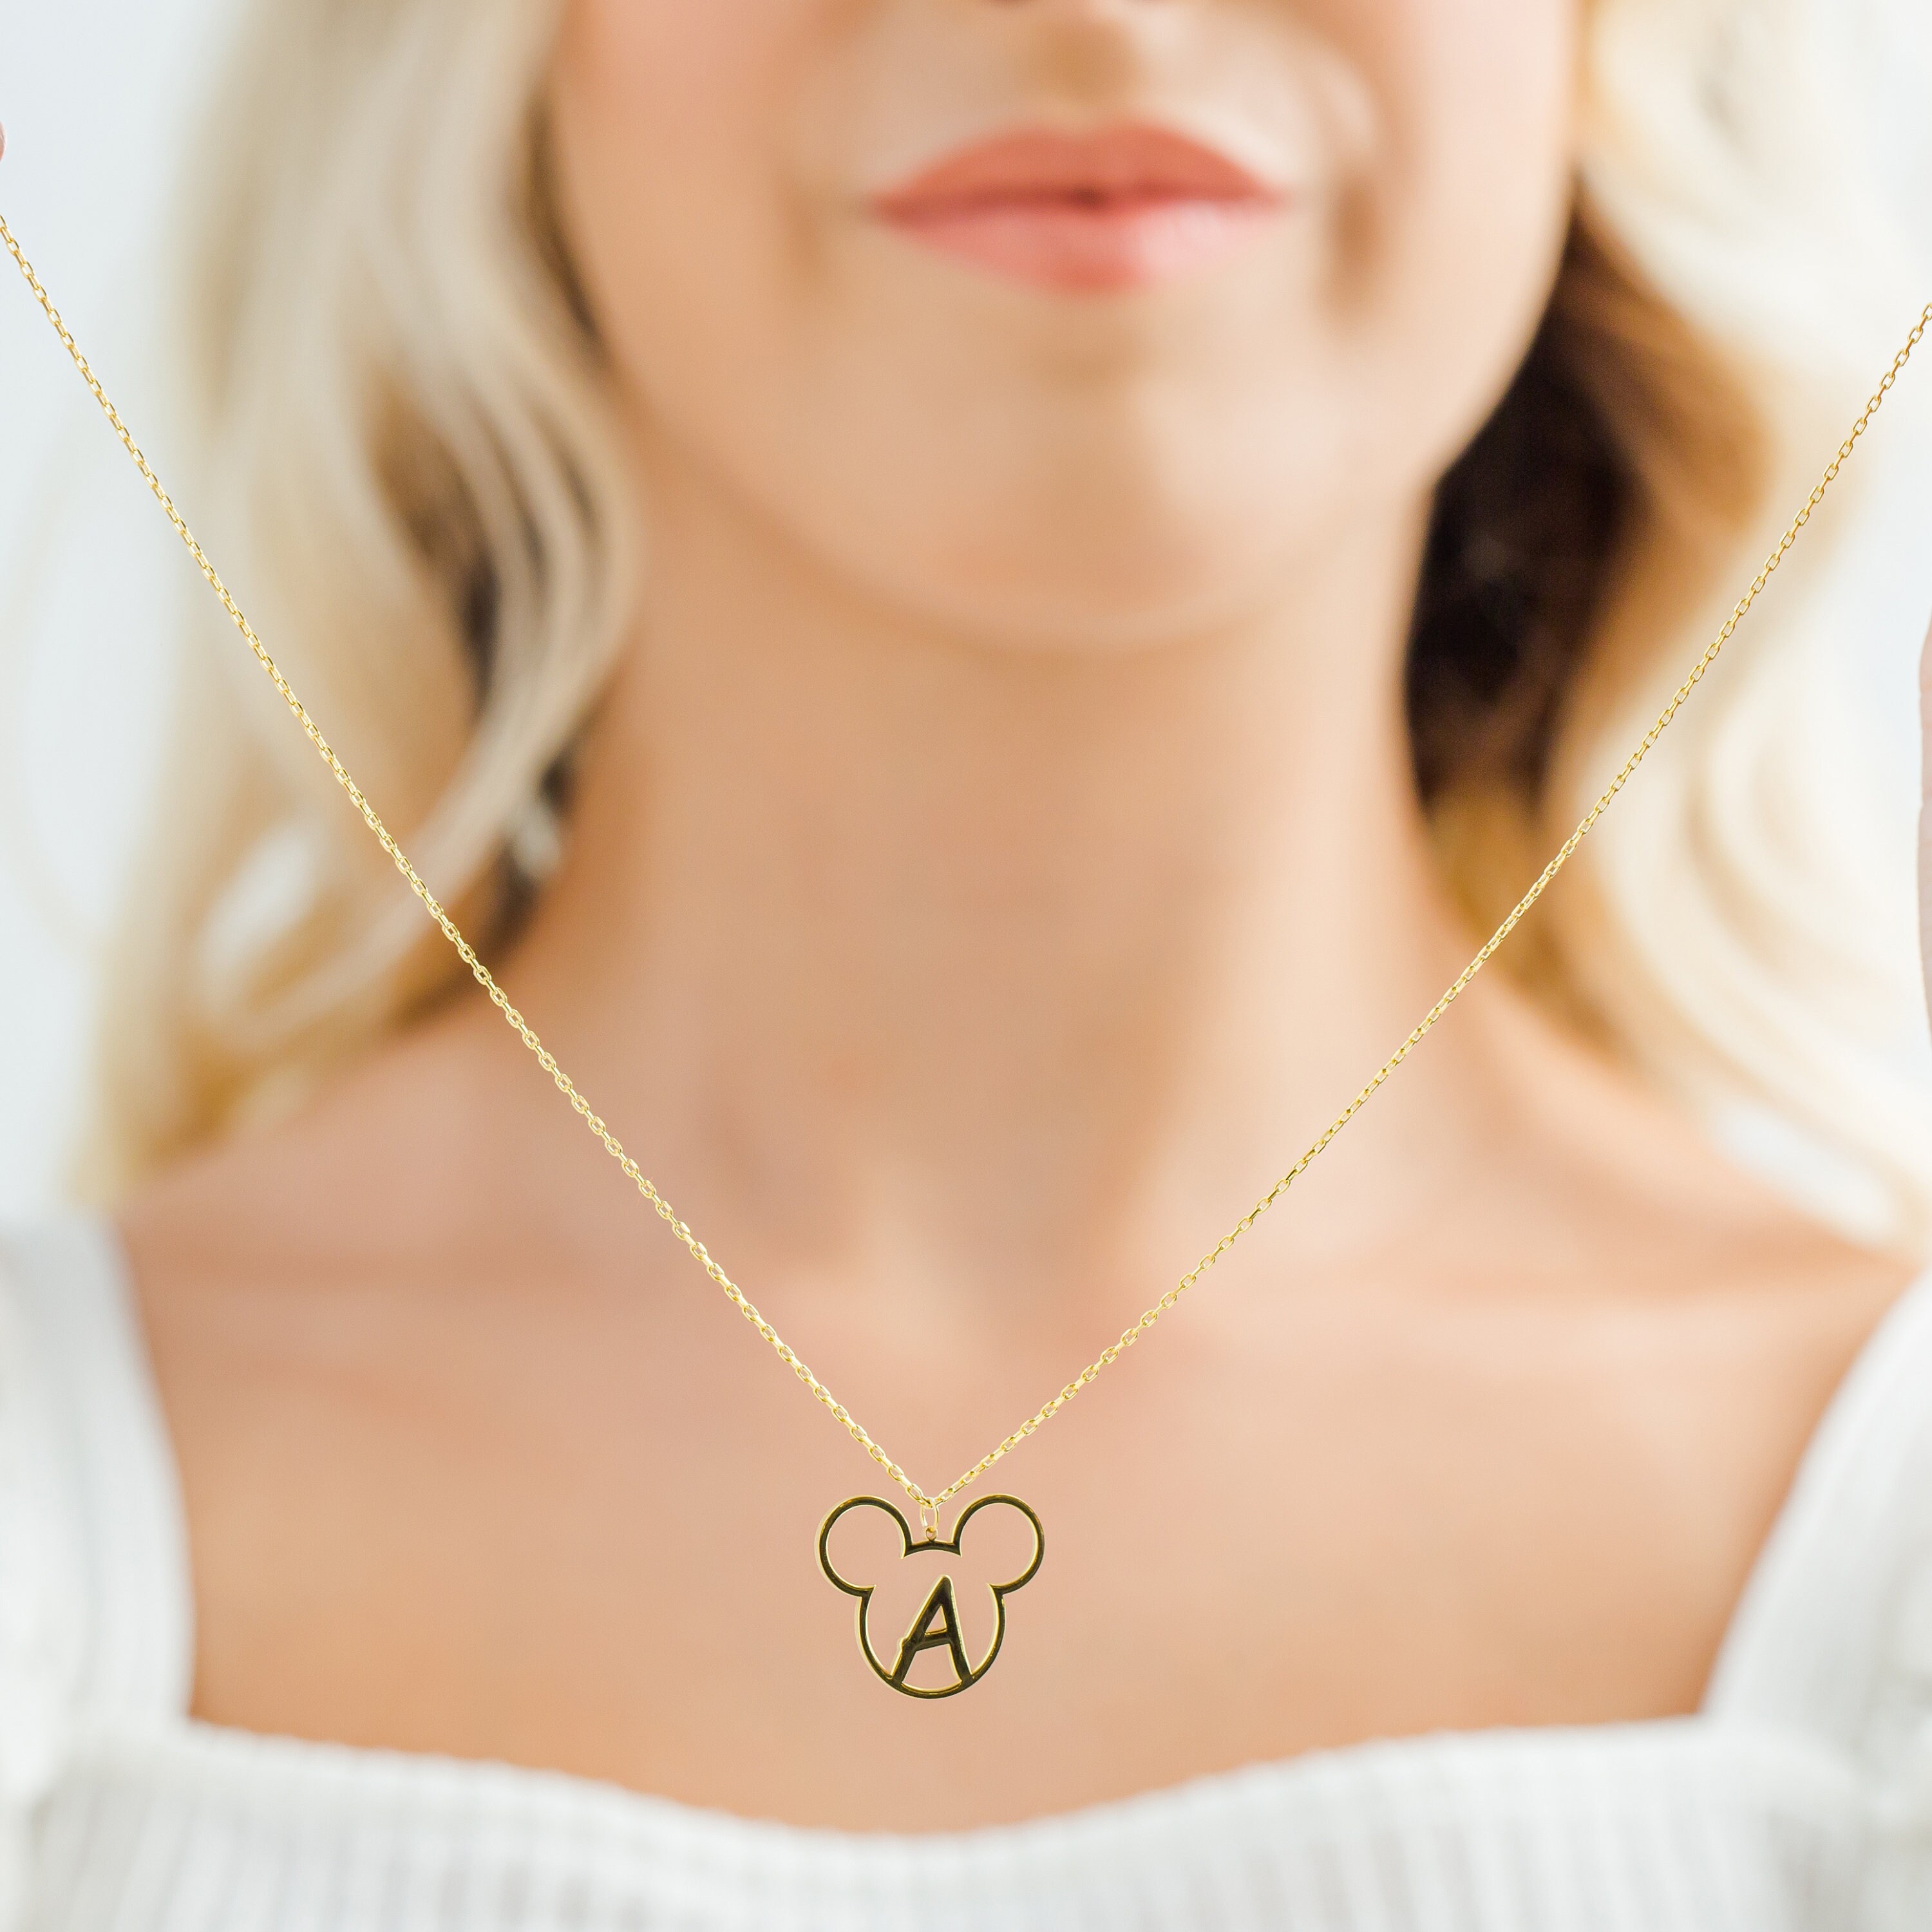 Mickey Mouse Necklace, Disney Necklace, Sterling Silver Necklace Mickey  Mouse, Mickey Necklace, Disney Necklace for Women, Disney Gifts, 